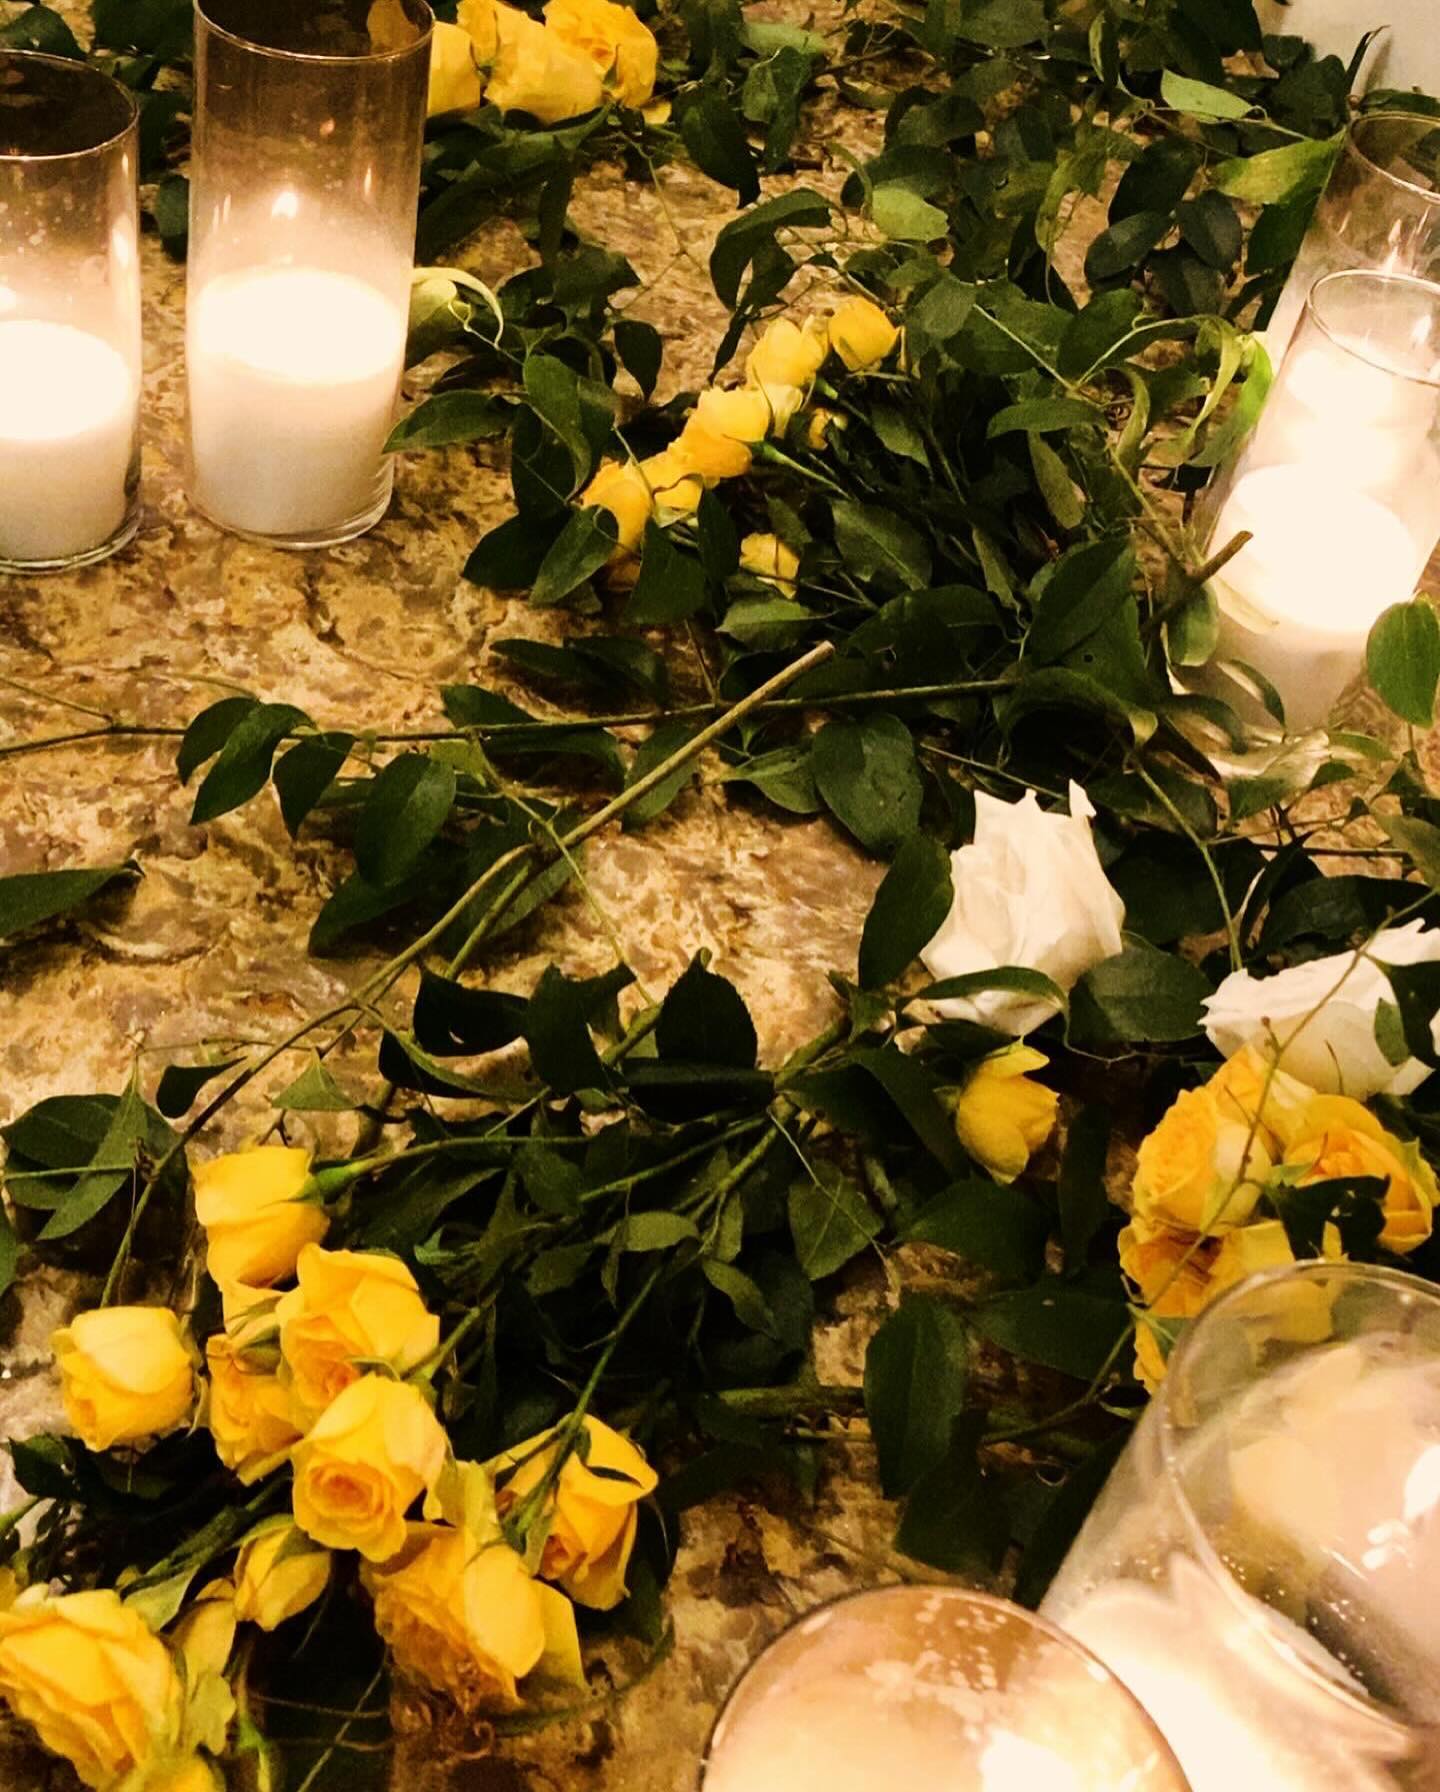 The decor was neutral, with white candles and yellow and white roses